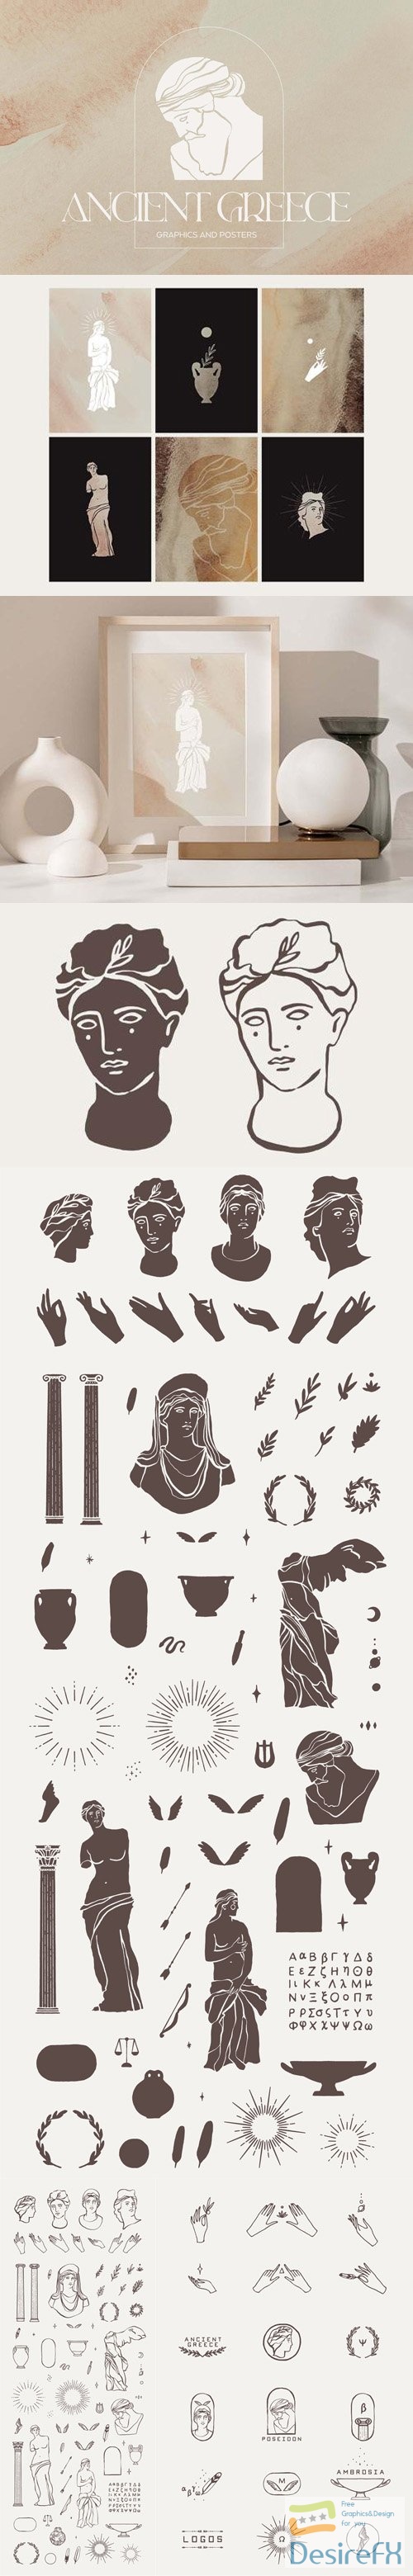 Ancient Greece Art Vector Graphics Collection